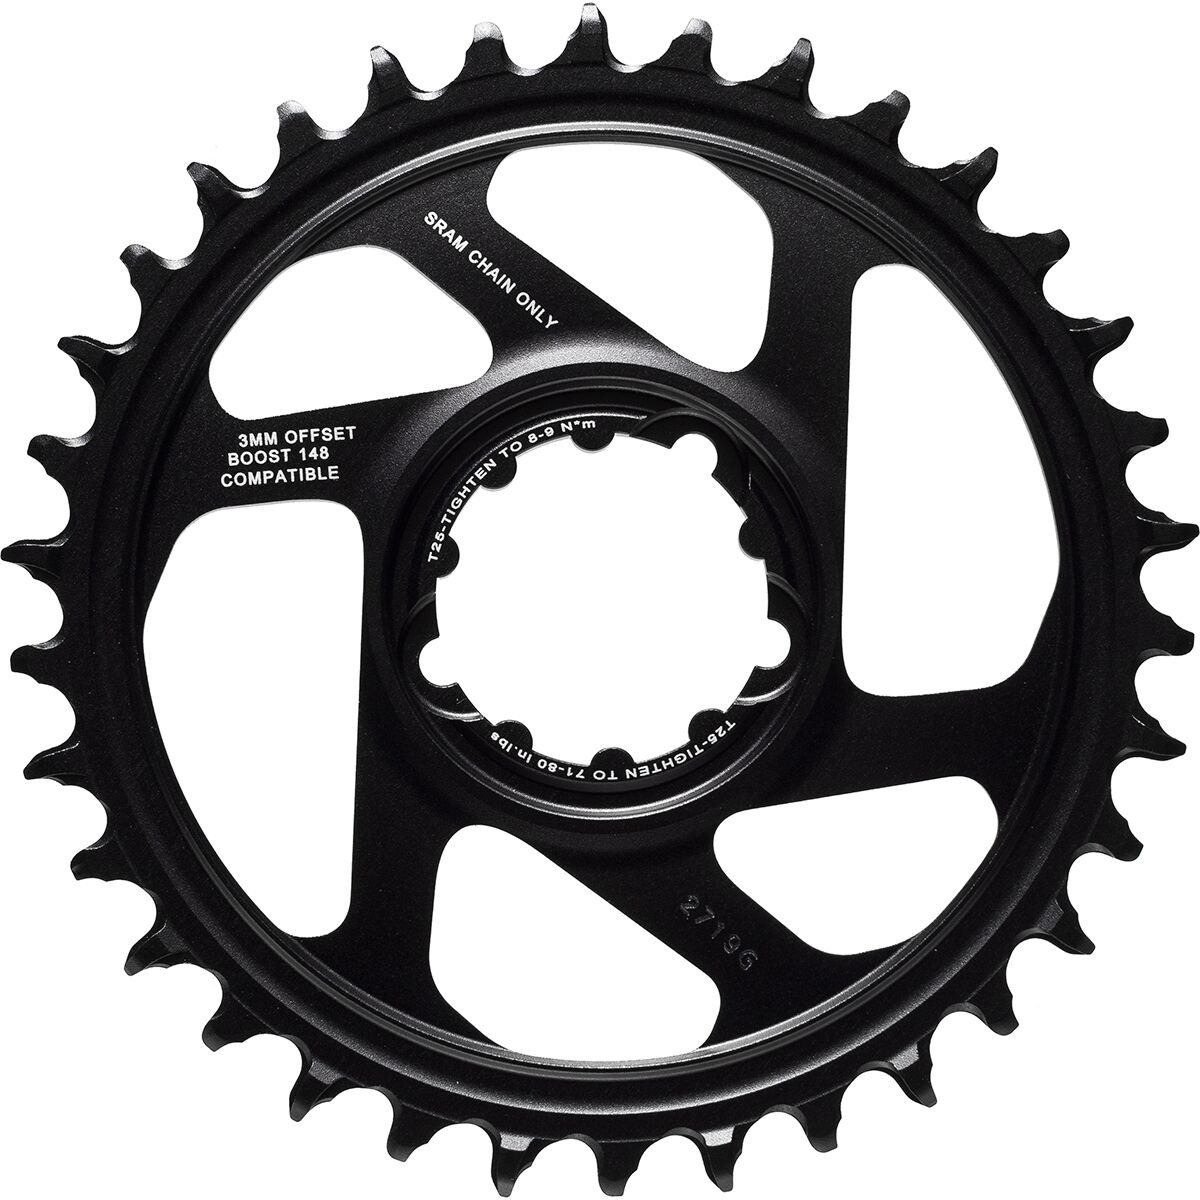 SRAM X-sync 2 Eagle Chainring 36t Direct Mount 3mm Boost Offset Black for sale online 